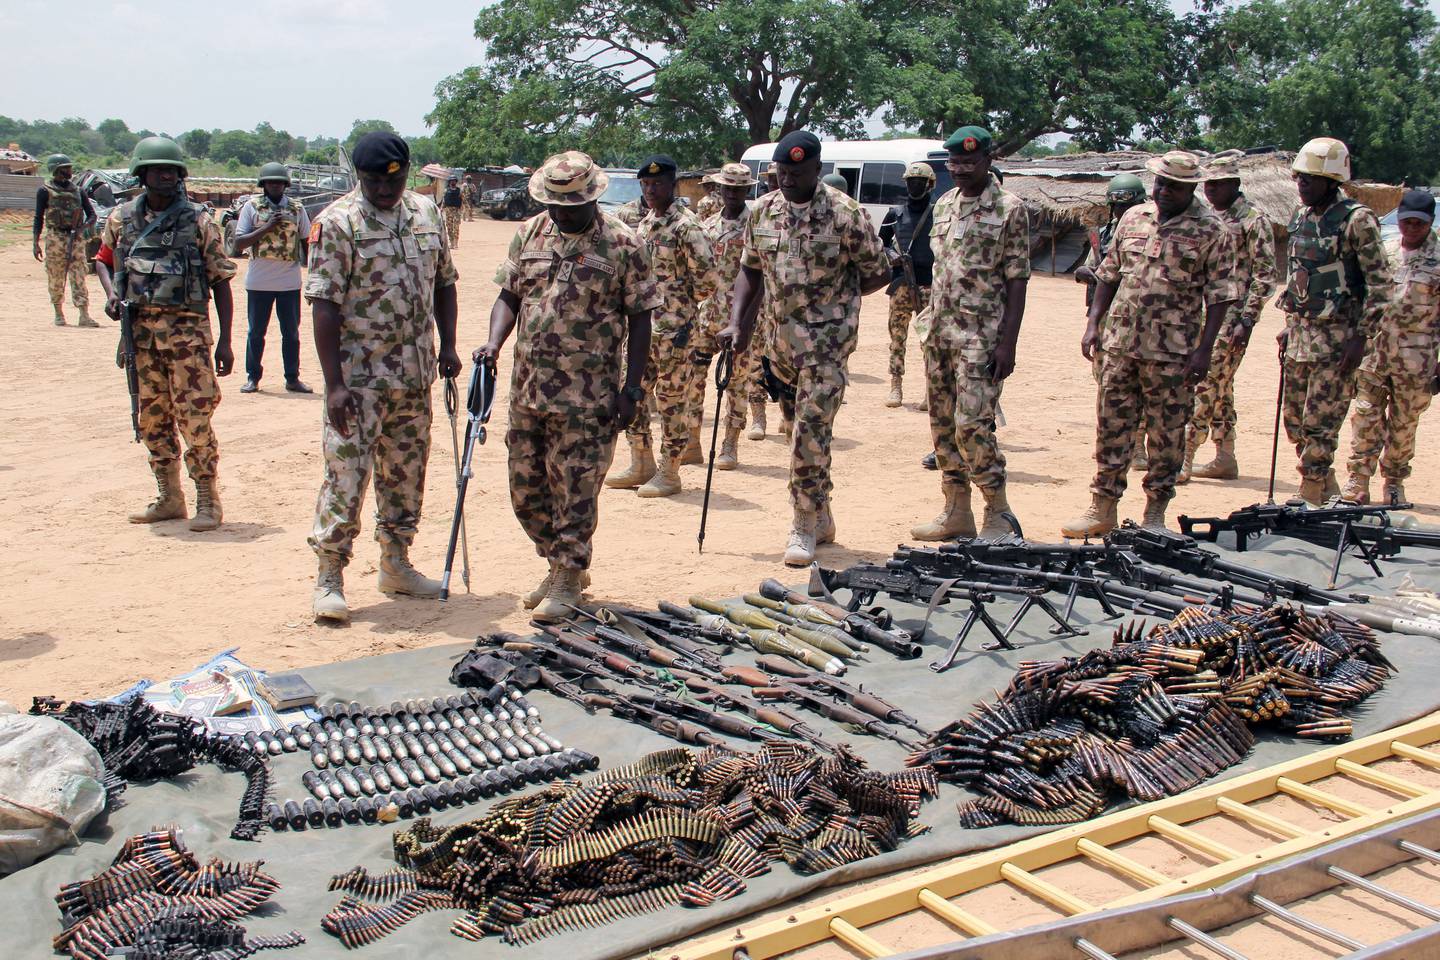 Military commanders inspect arms and ammunitions recovered from Boko Haram militants in Nigeria. (Photo by AUDU MARTE / AFP)